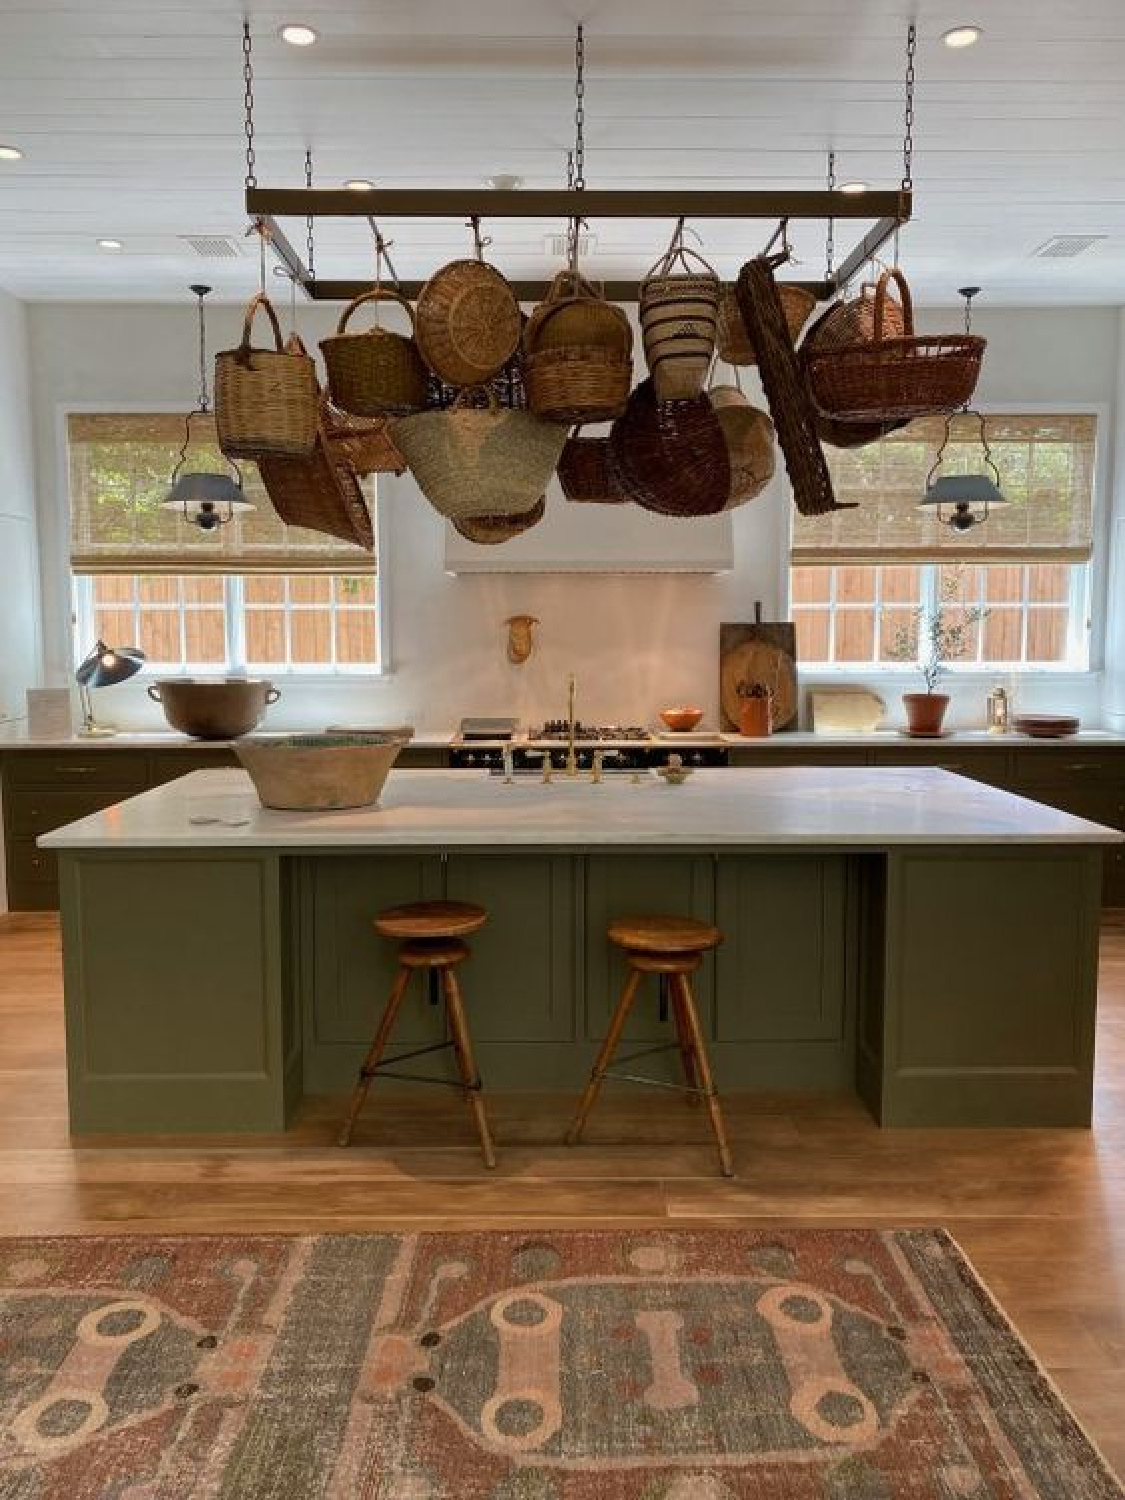 Benjamin Moore Gettysburg Gray kitchen island in 2020 Milieu Designer Showhouse. Shannon Bowers brought baskets, European antiques, patina, understated elegance, and sophisticated simplicity. #shannonbowers #timelessinteriors